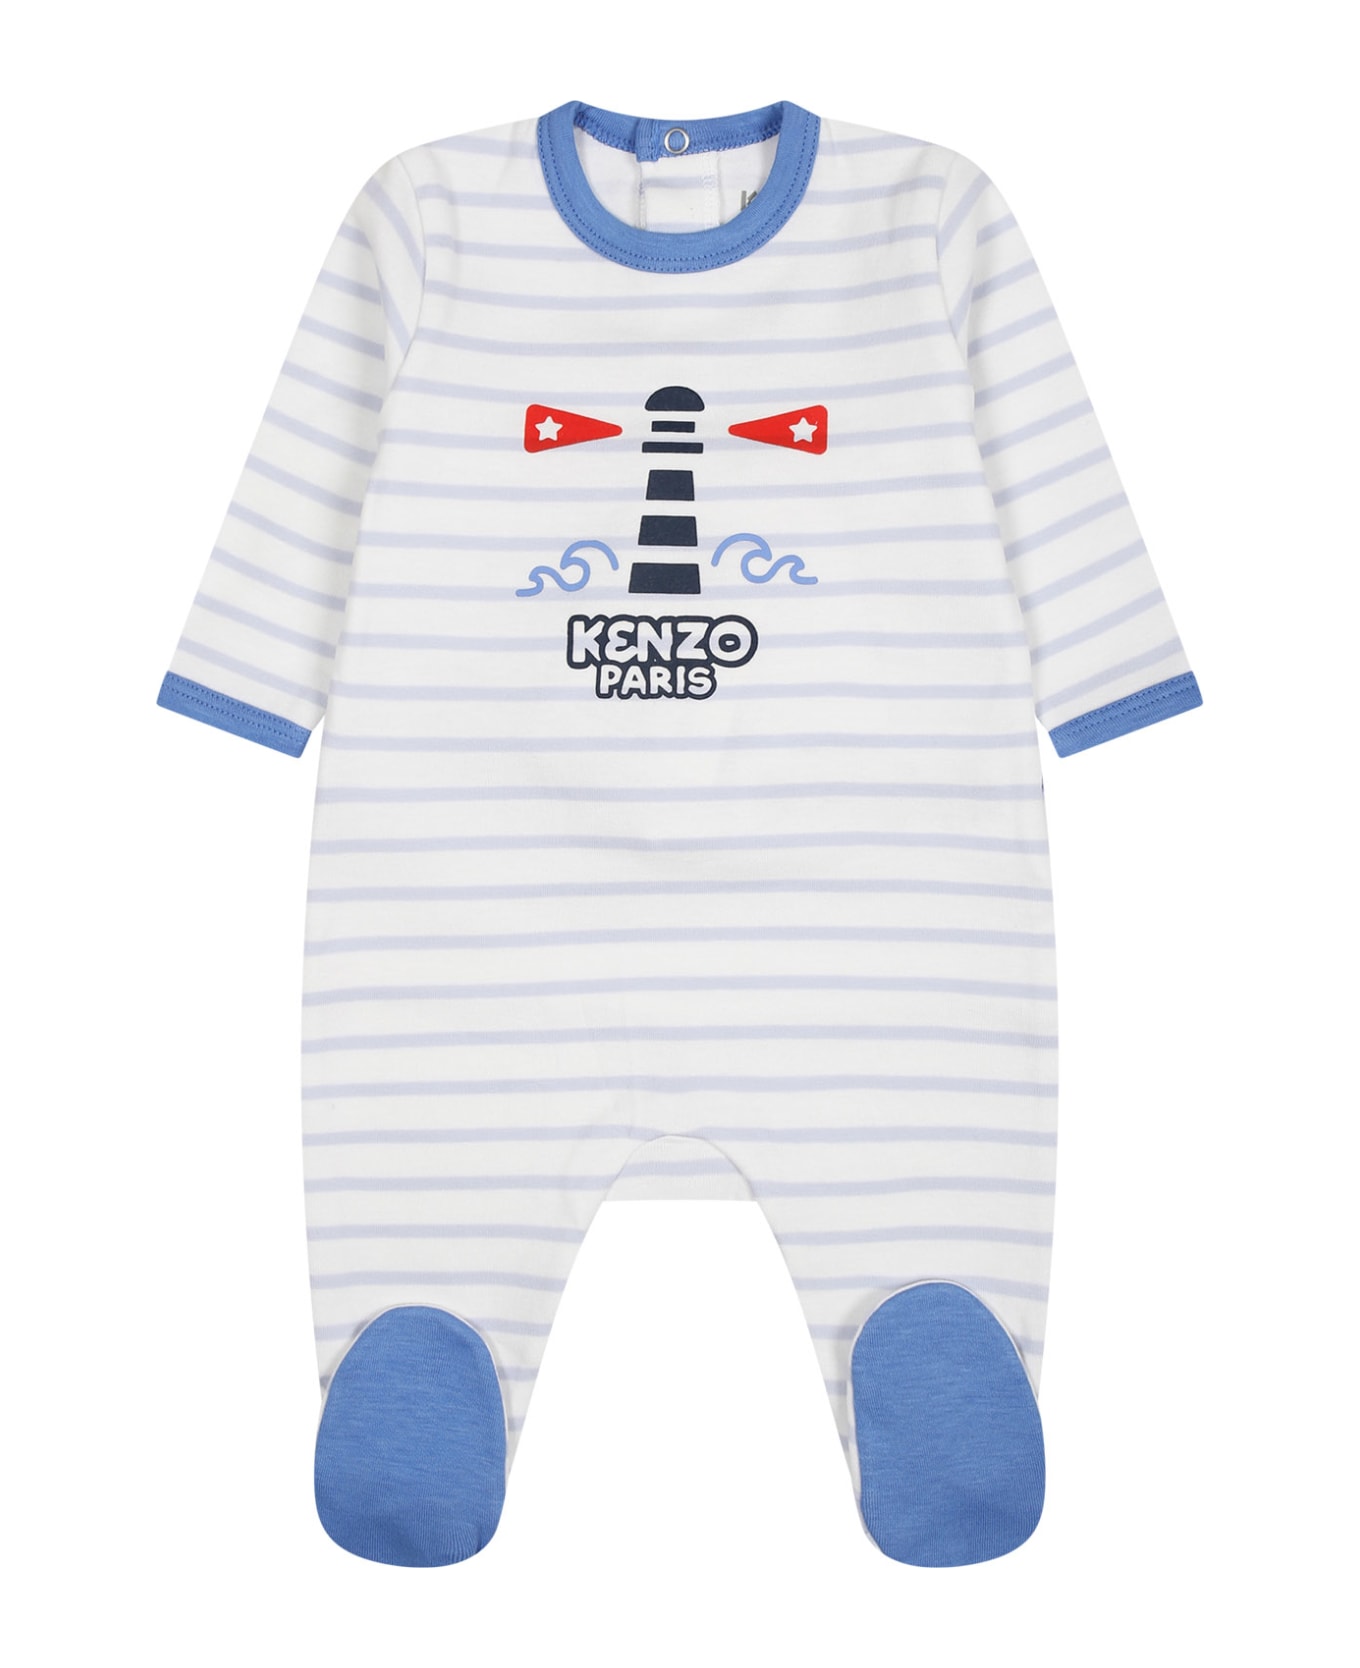 Kenzo Kids Multicolor Babygrow For Baby Boy With Print - Multicolor